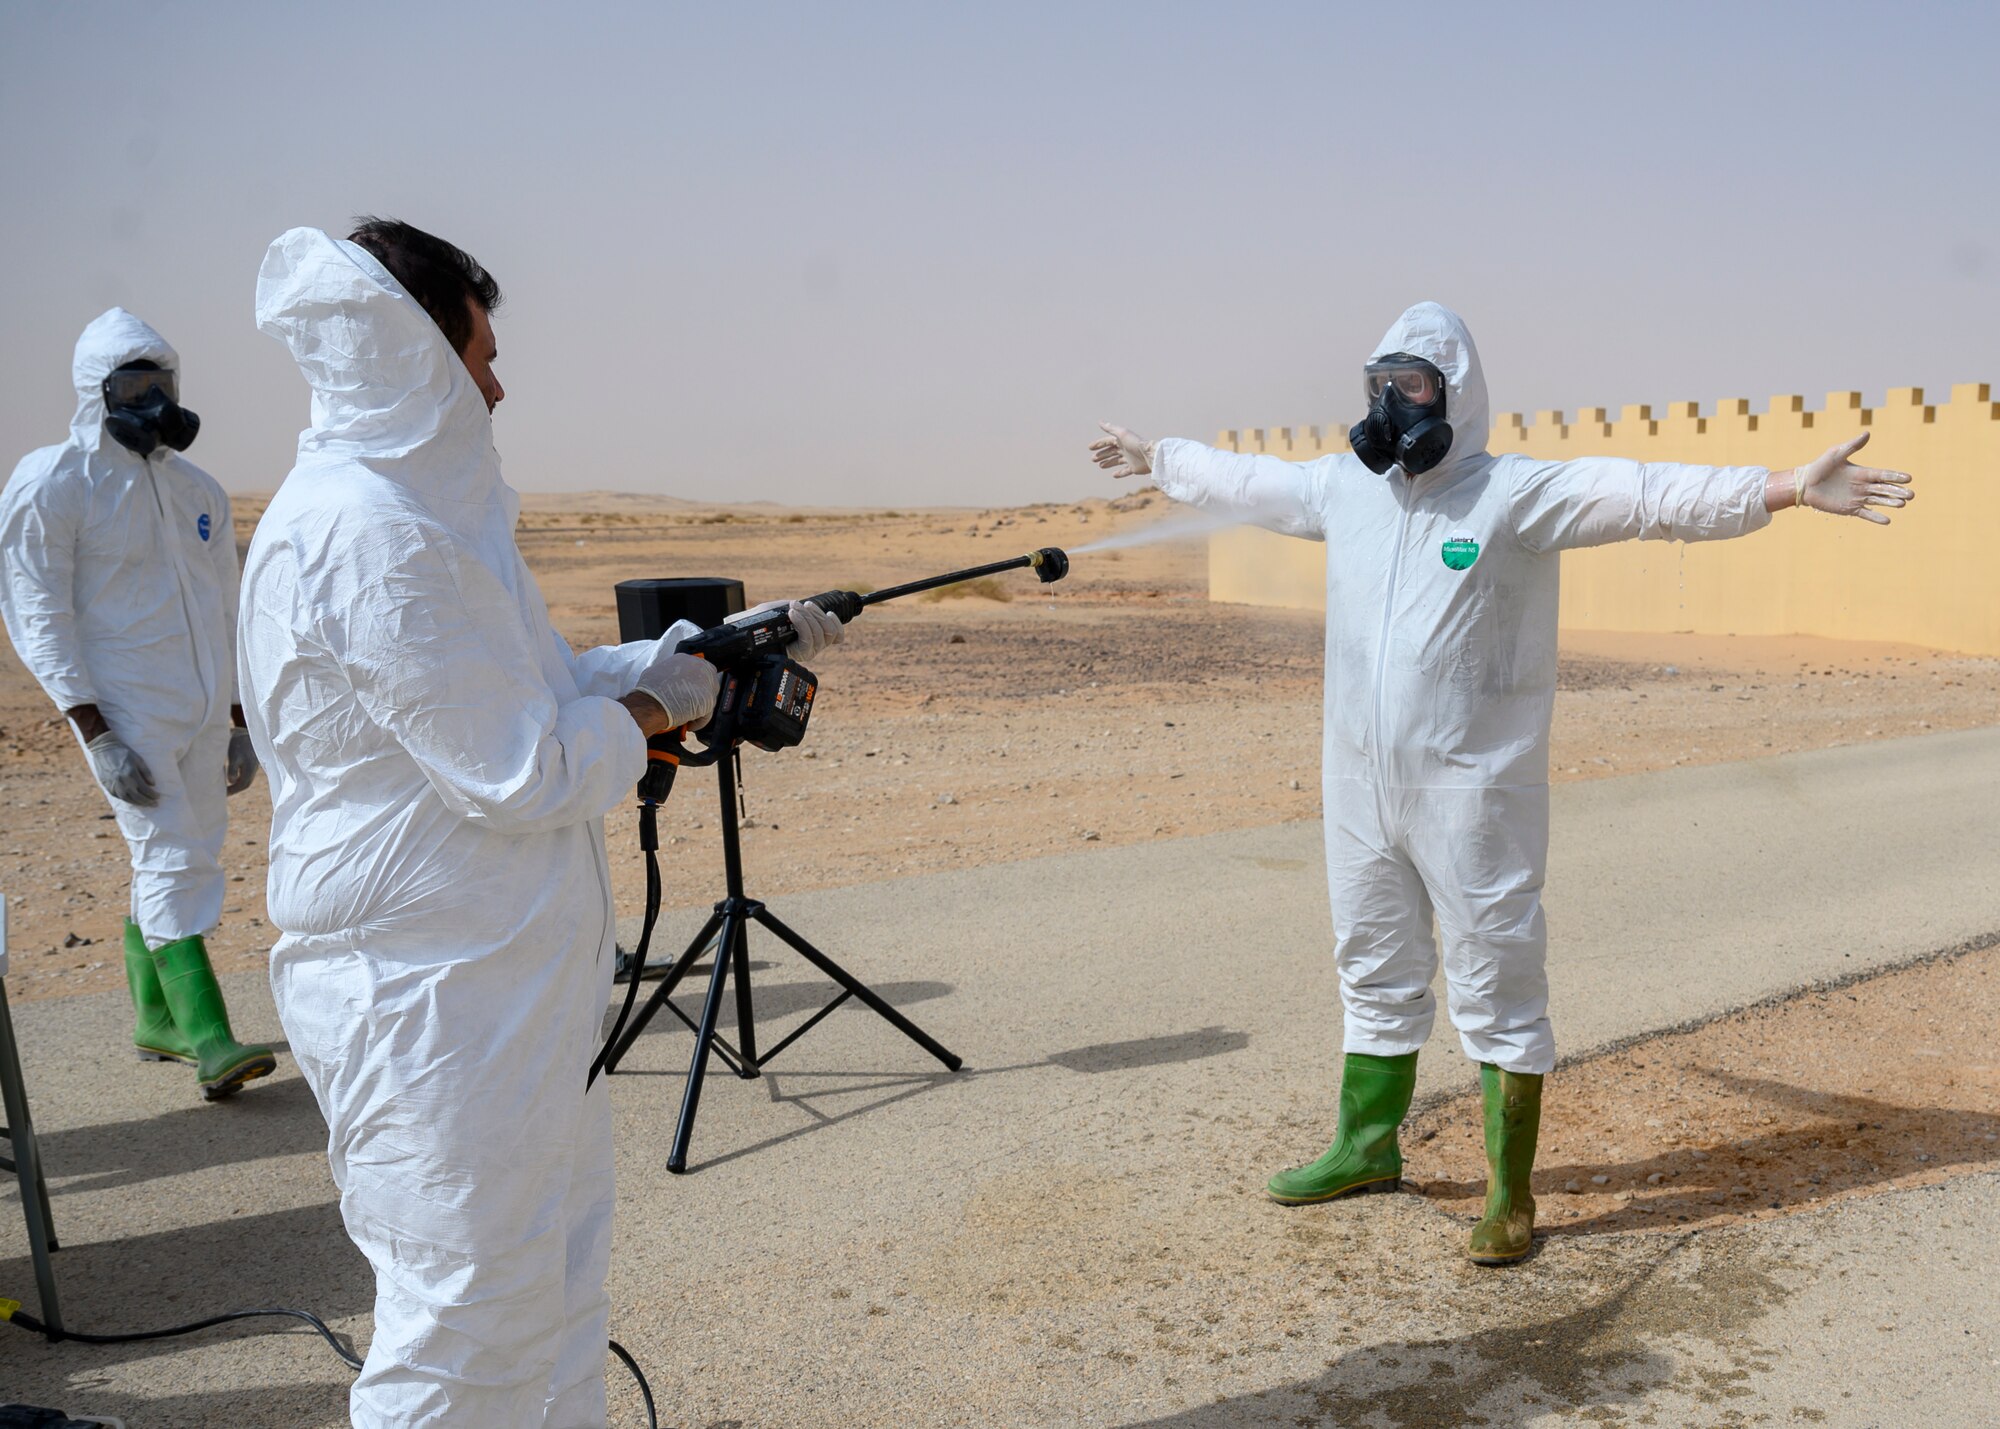 Members of the Royal Saudi Air Force spray members of the 378th Civil Engineer Squadron emergency management flight to practice decontaminating techniques after a chemical, biological, radiological and nuclear response exercise, Prince Sultan Air Base, Kingdom of Saudi Arabia, May 26, 2021. The combined exercise demonstrates the emergency management integration between USAF and RSAF CBRN response units while also familiarizing each unit with the other’s techniques and procedures. (U.S. Air Force photo by Senior Airman Samuel Earick)